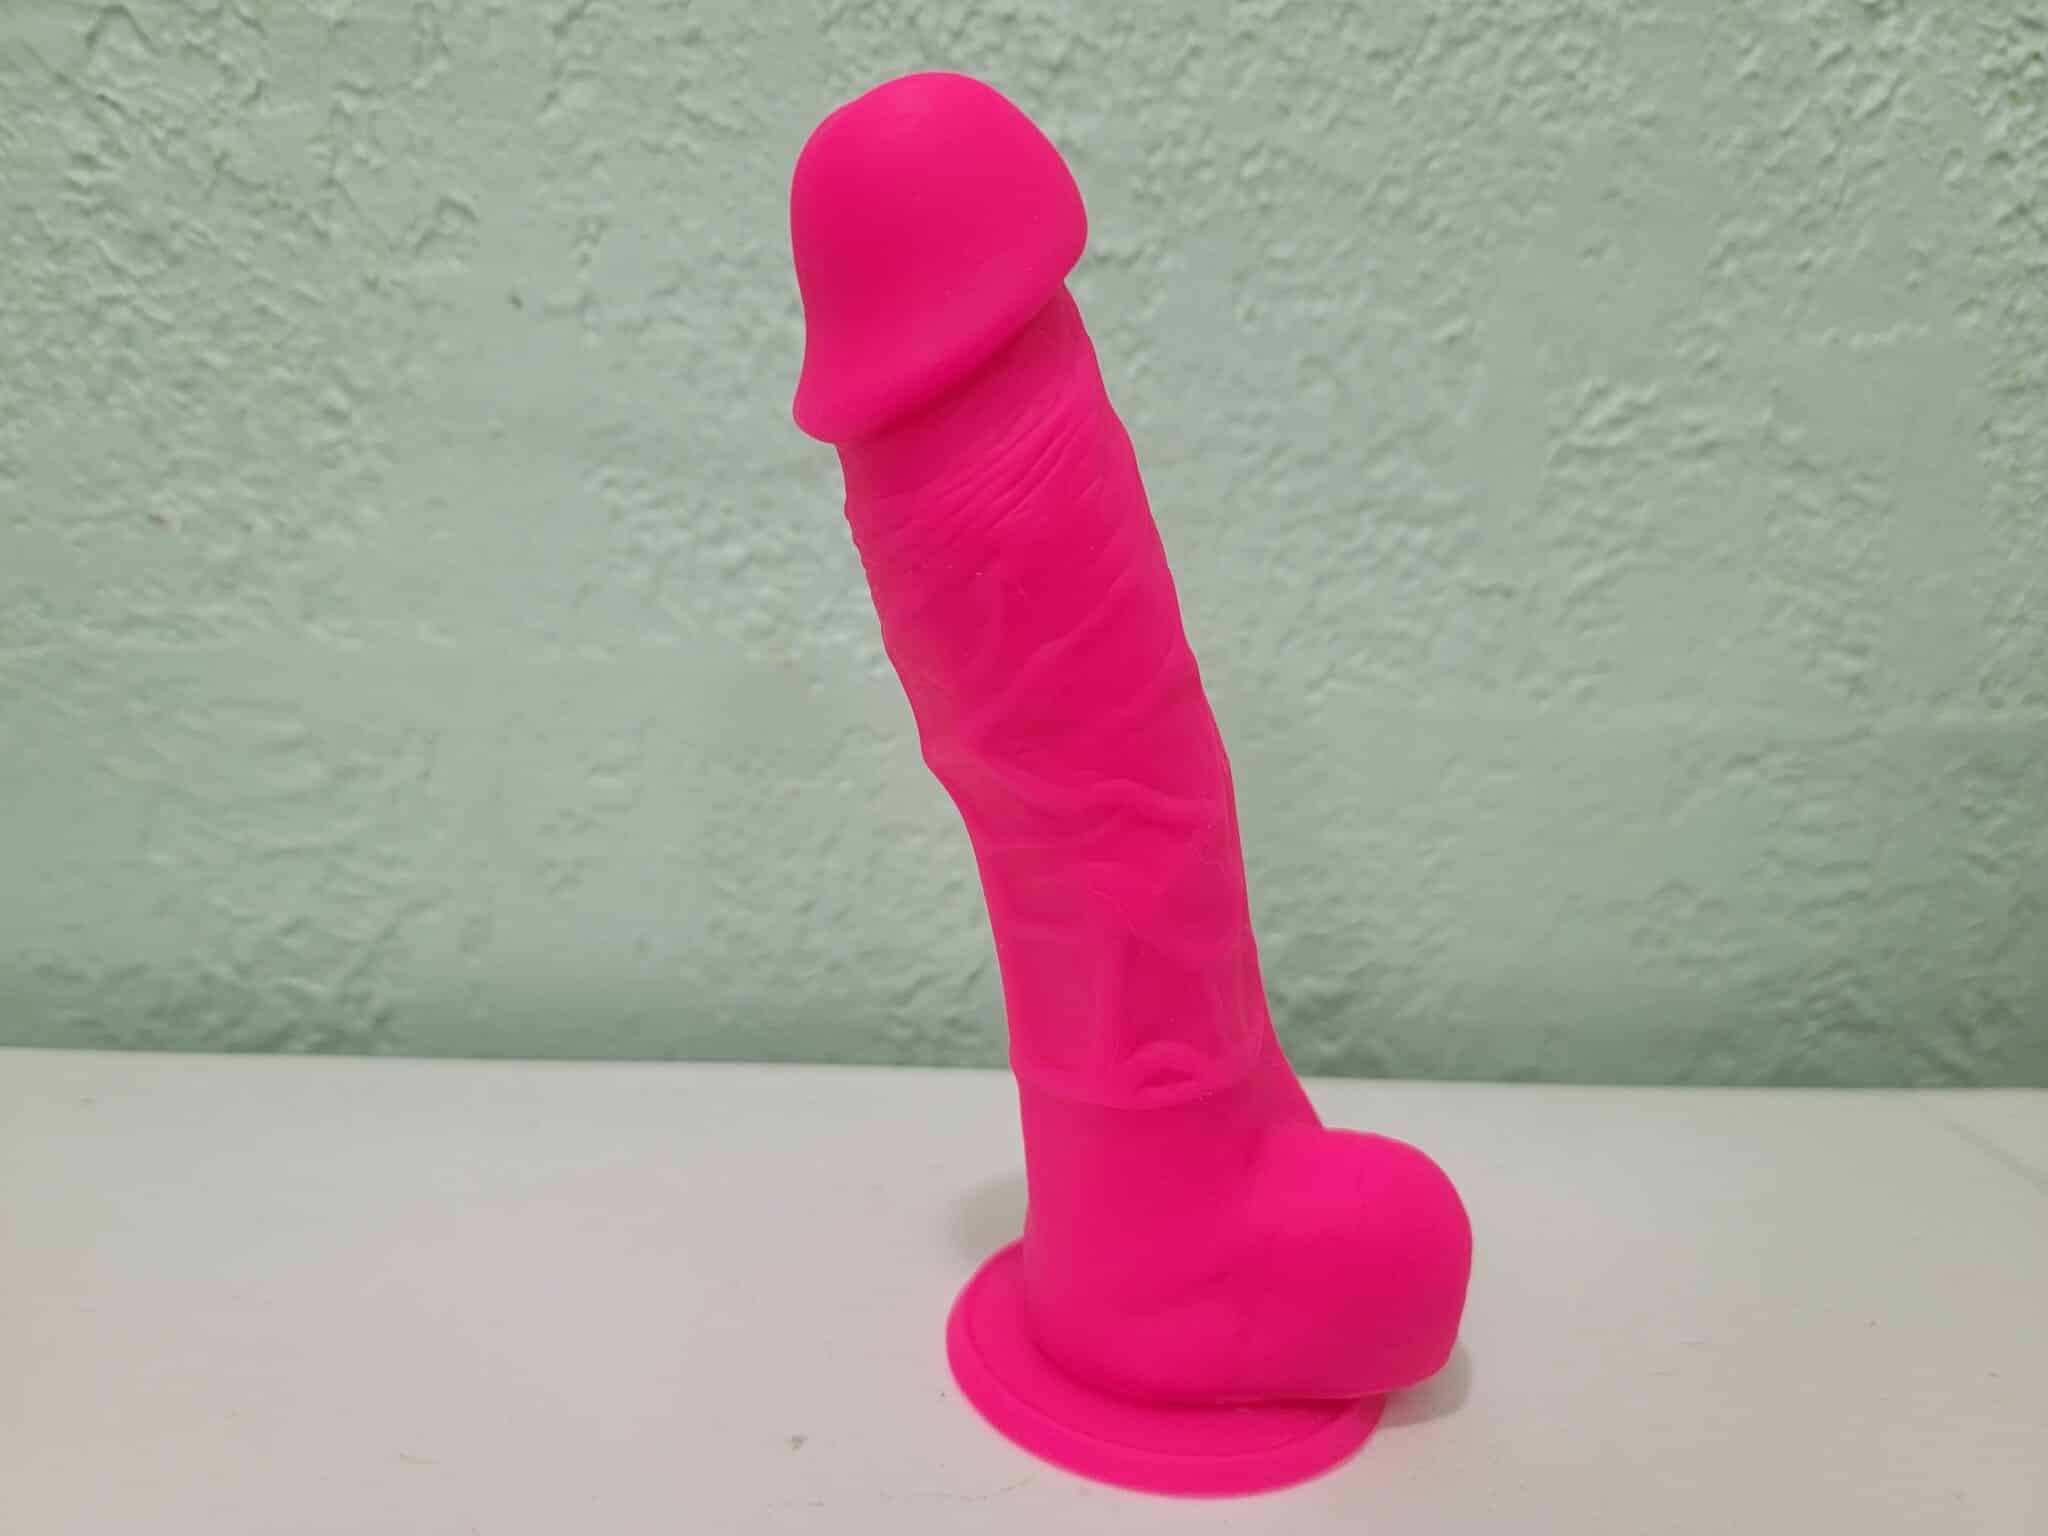 Colours Pleasures 5 Inch Dildo Design Quirks: The Good and the Bad